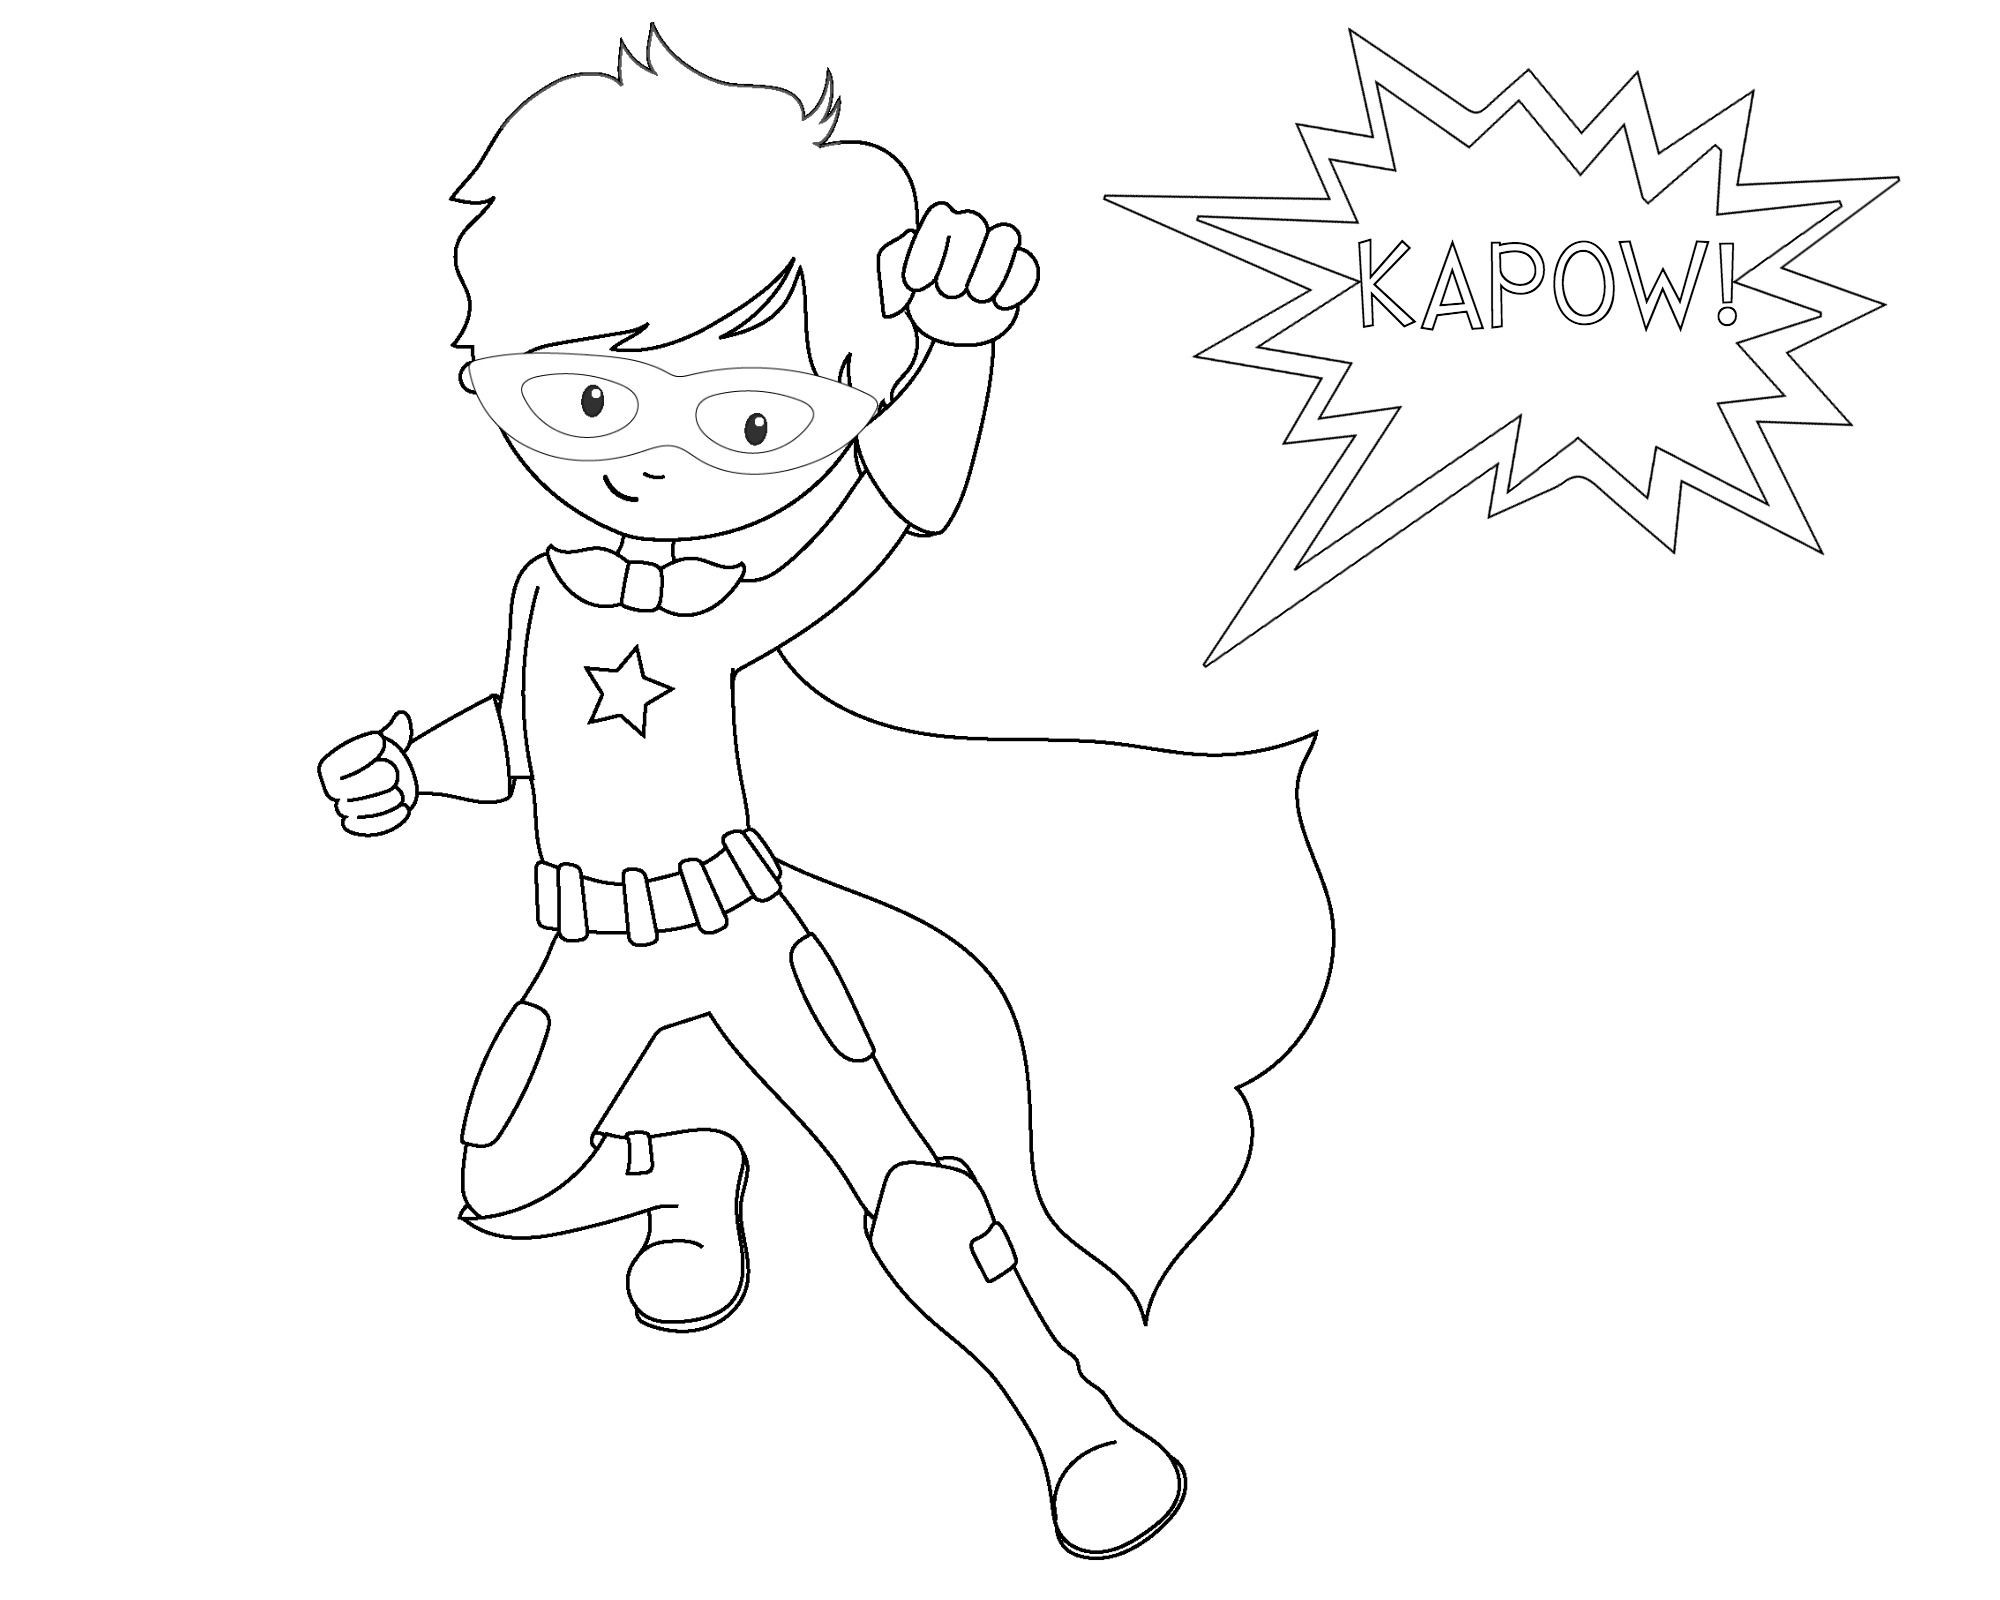 Superhero Coloring Pages For Toddlers
 Free Printable Superhero Coloring Sheets for Kids